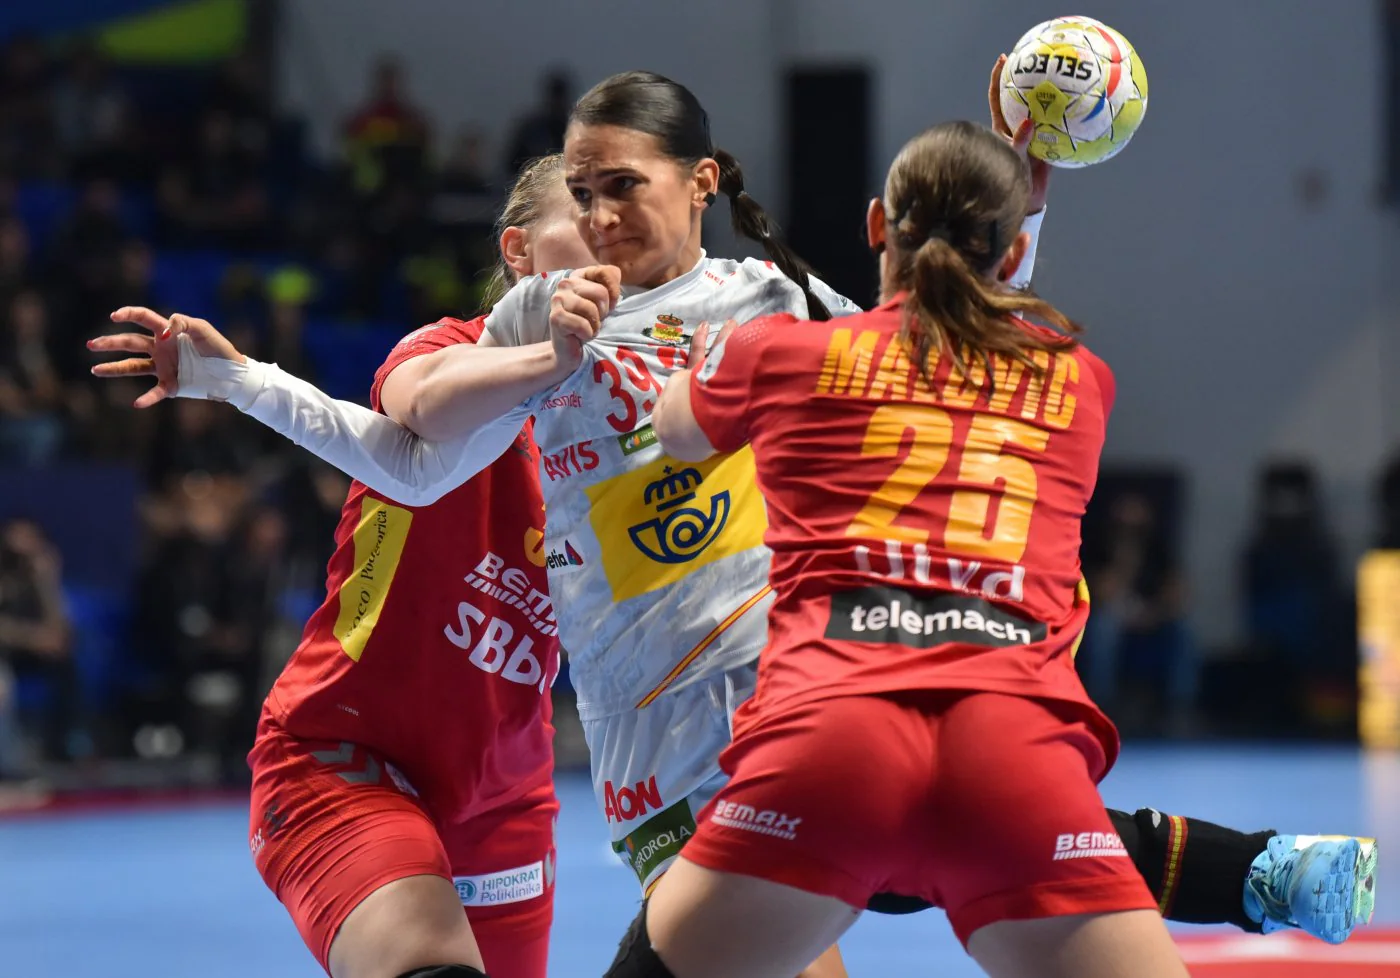 Almudena Rodríguez tries to make a shot against the opposition of two players from Montenegro. 